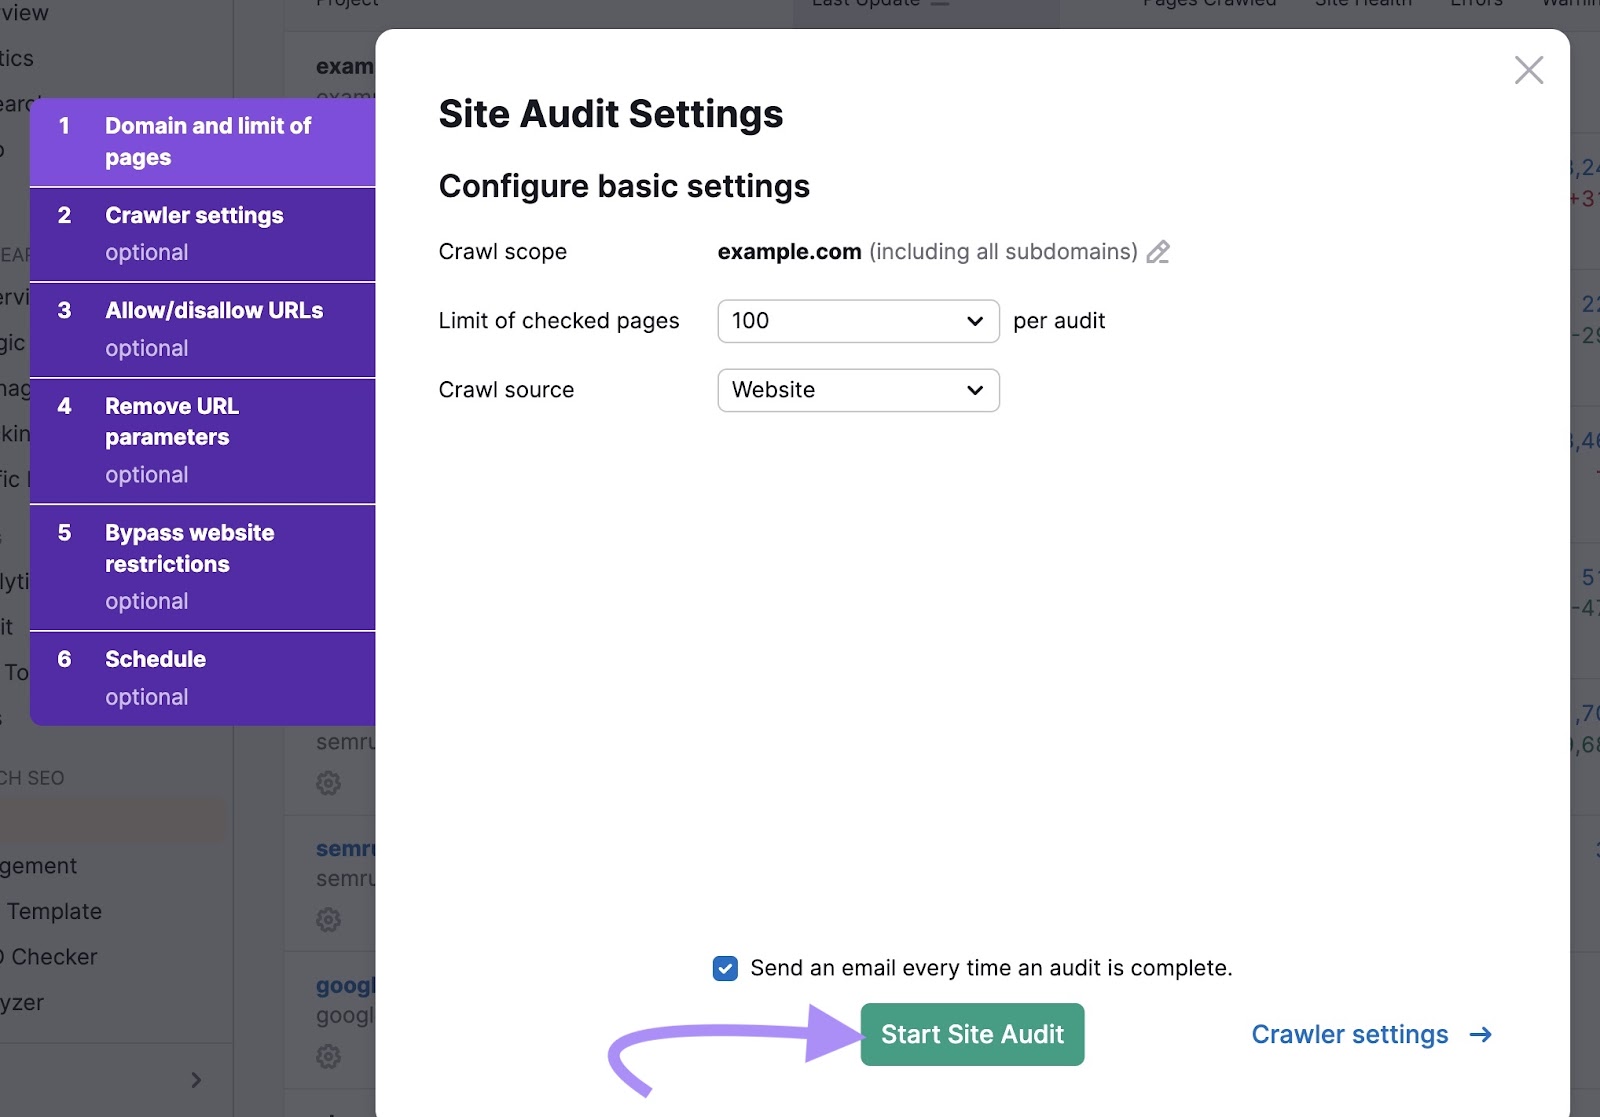 "Start Site Audit" button at the bottom of Site Audit Settings window